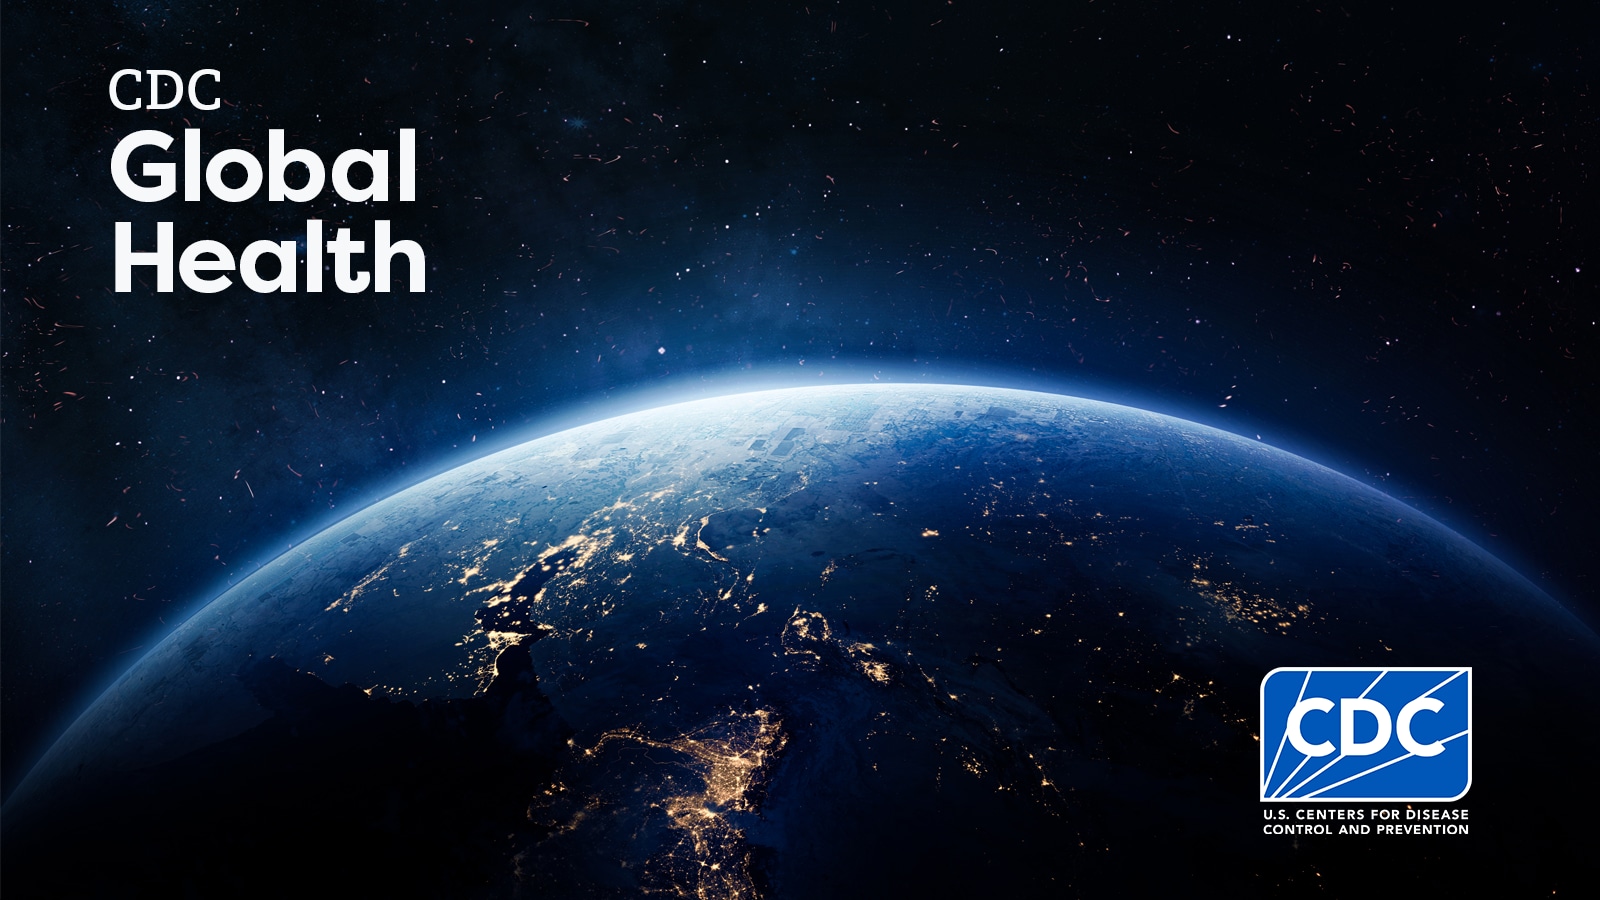 Image of the world as viewed from space. CDC logo banner with "CDC Global health" text above.